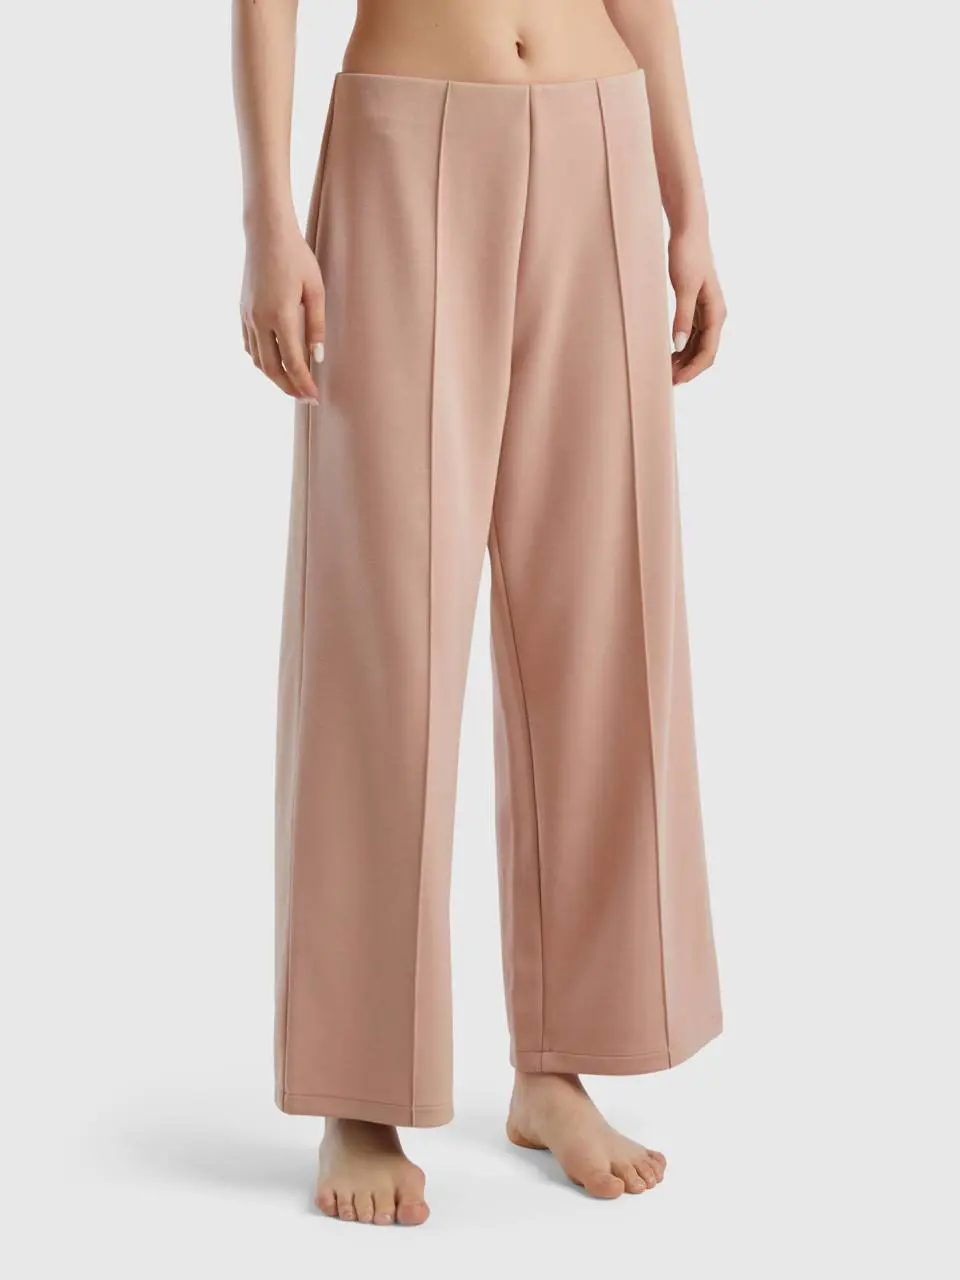 Benetton high-waisted palazzo trousers. 1